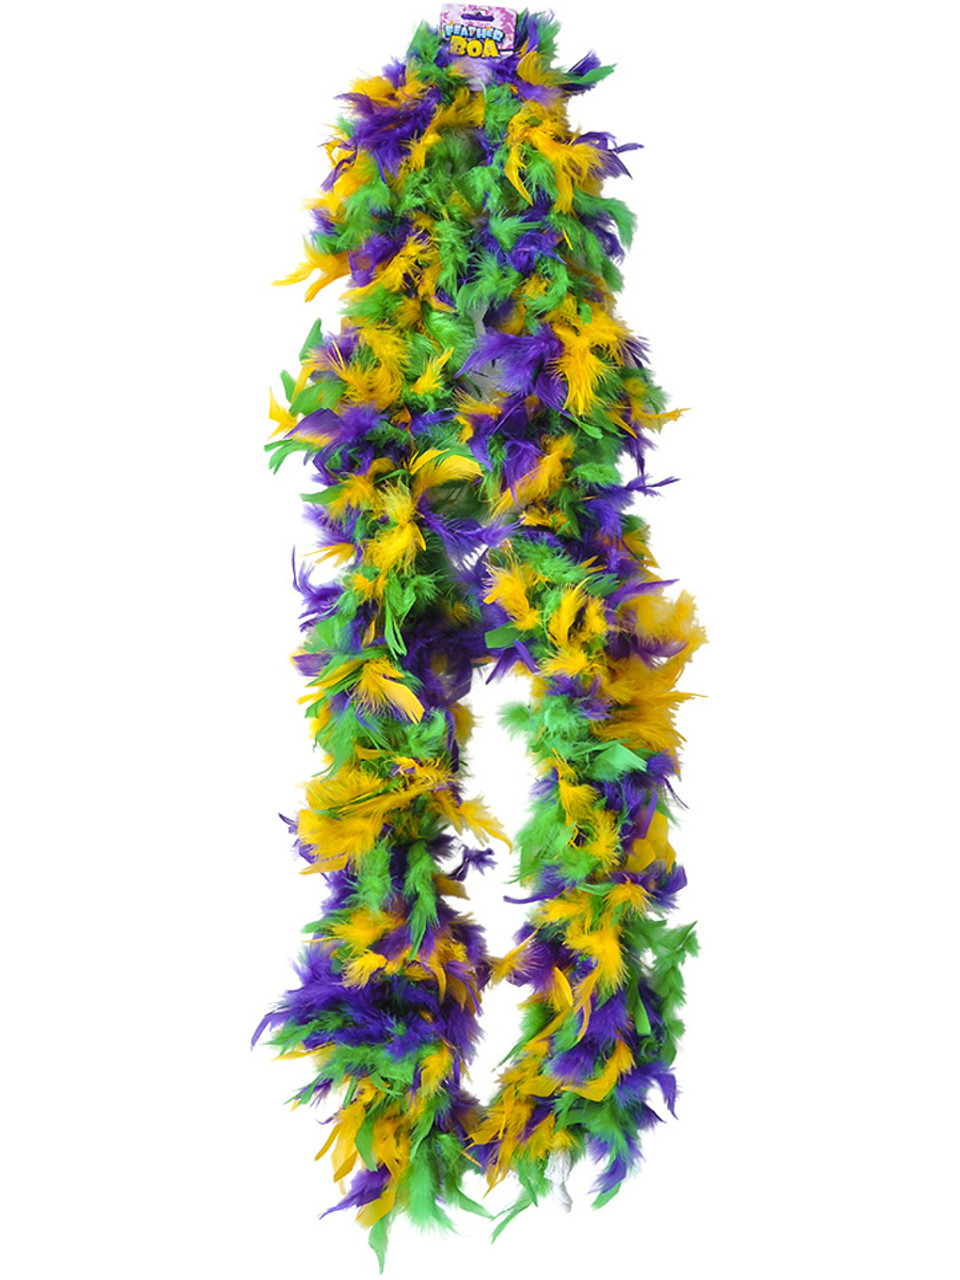 Second Life Marketplace - ~MaRdI GrAs Feathers in Purple Glass